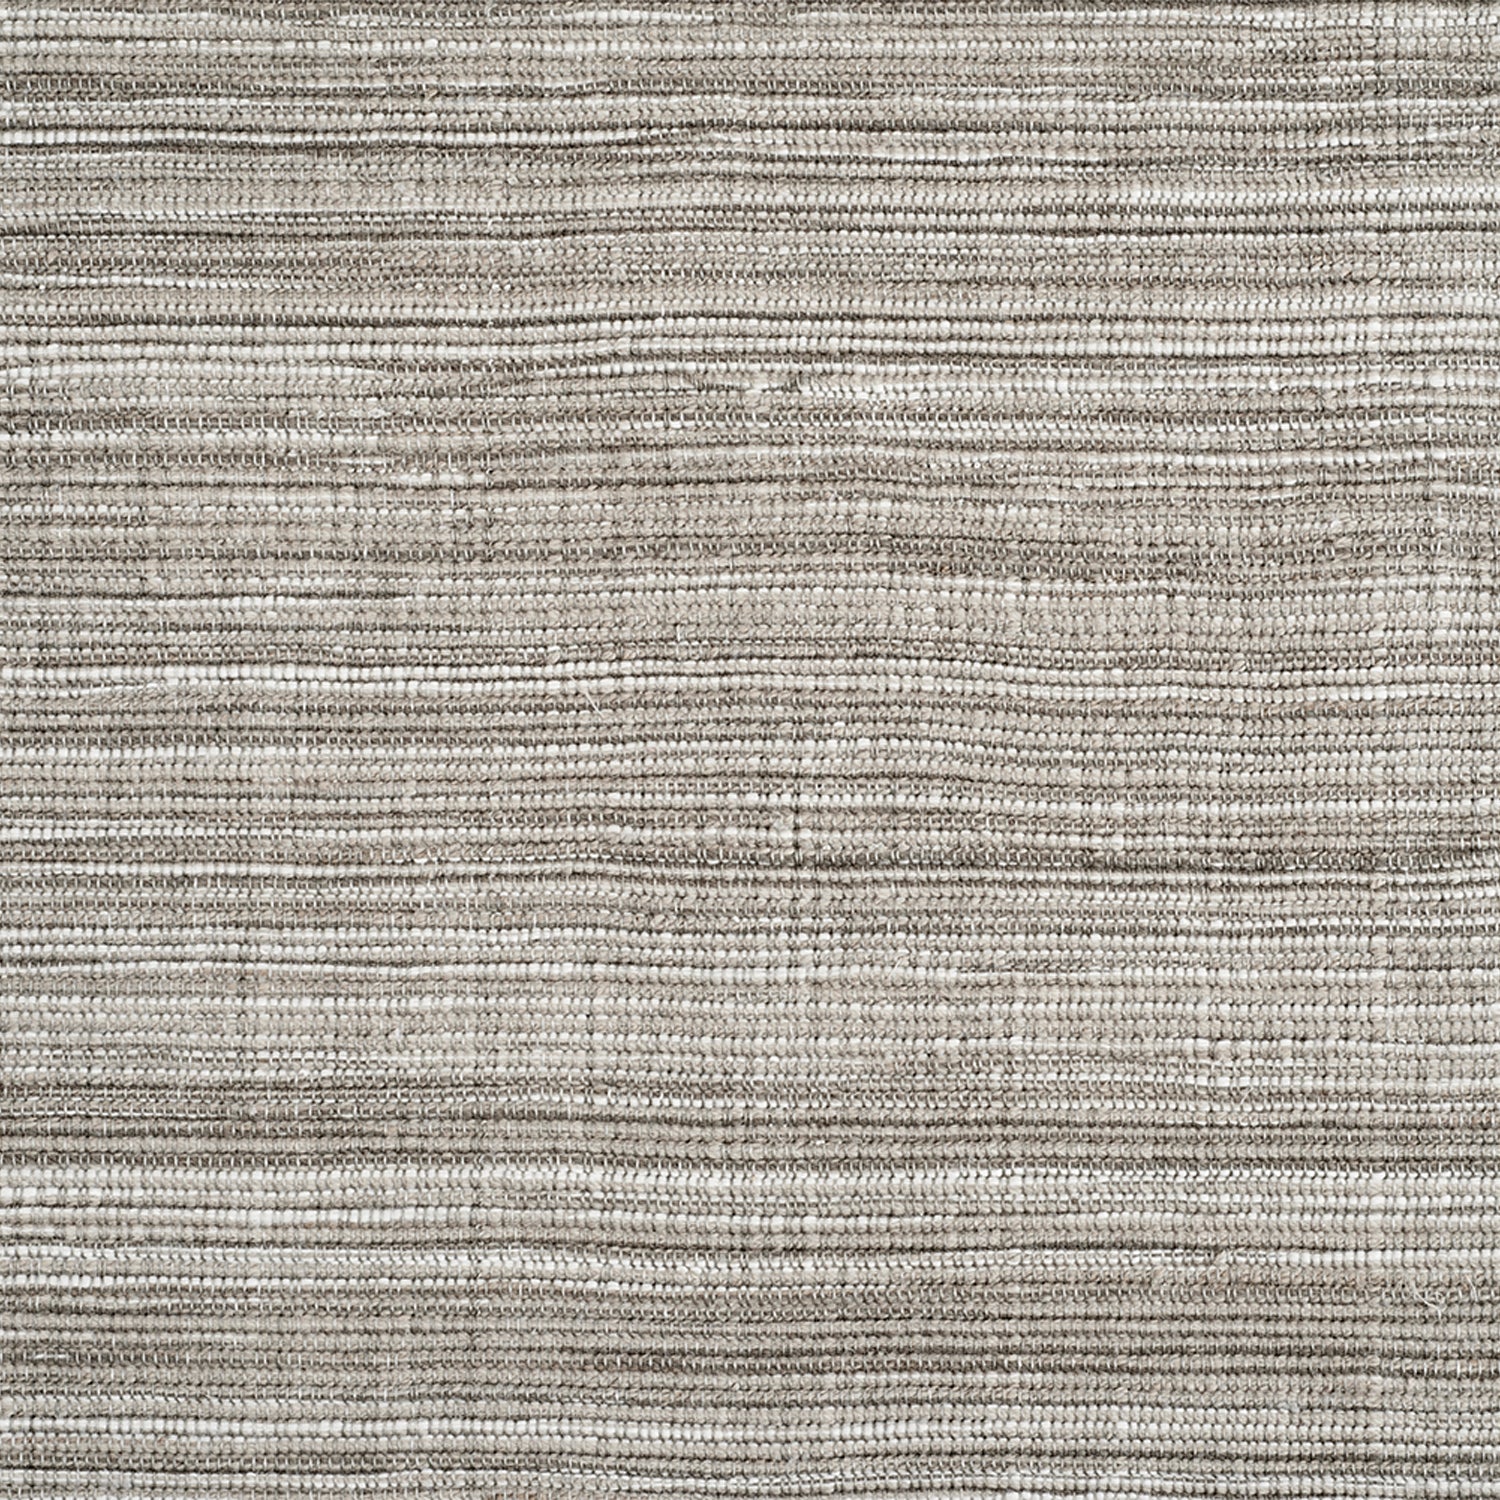 Wool-blend broadloom carpet swatch in a flat weave in mottled grey, brown and white.